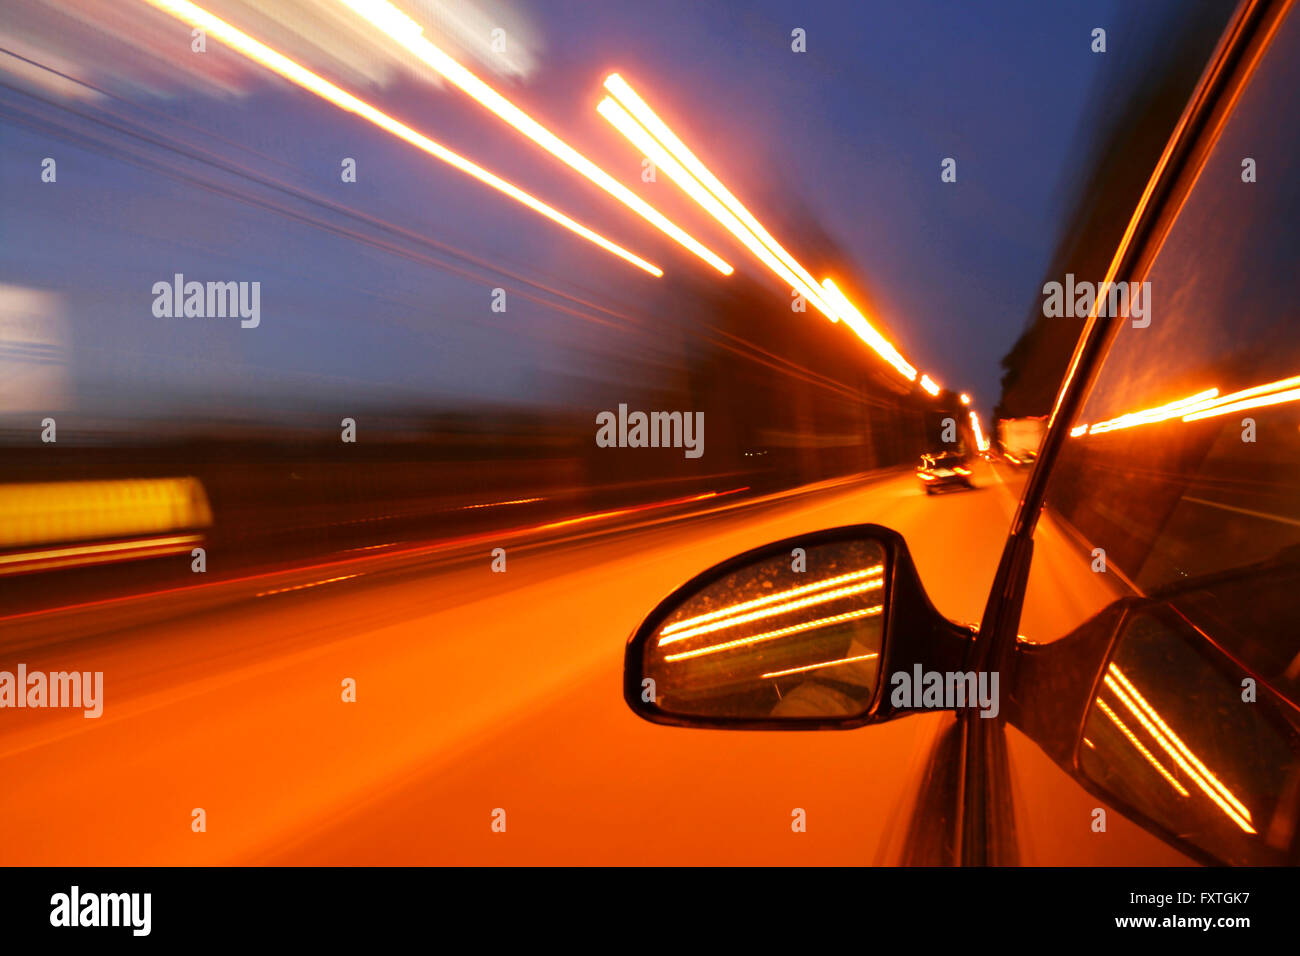 speed drive on car at night motion blurred Stock Photo